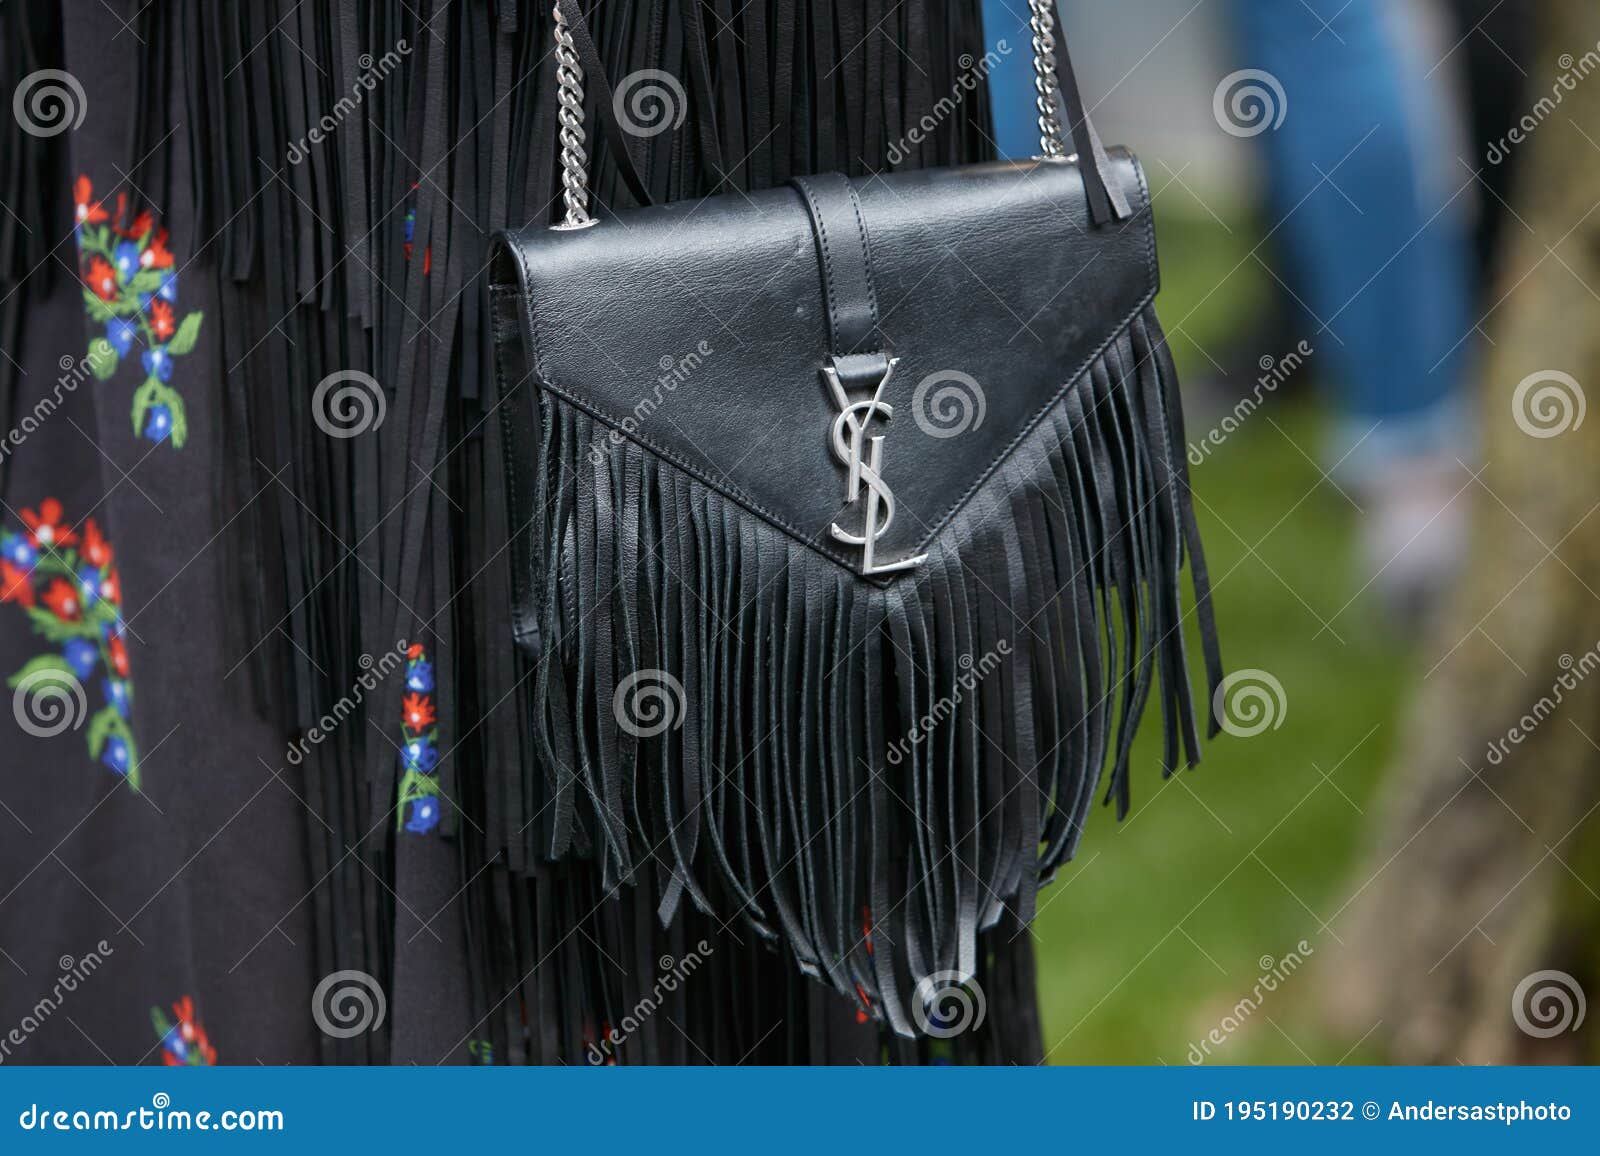 Ysl Bag Stock Photos - Free & Royalty-Free Stock Photos from Dreamstime